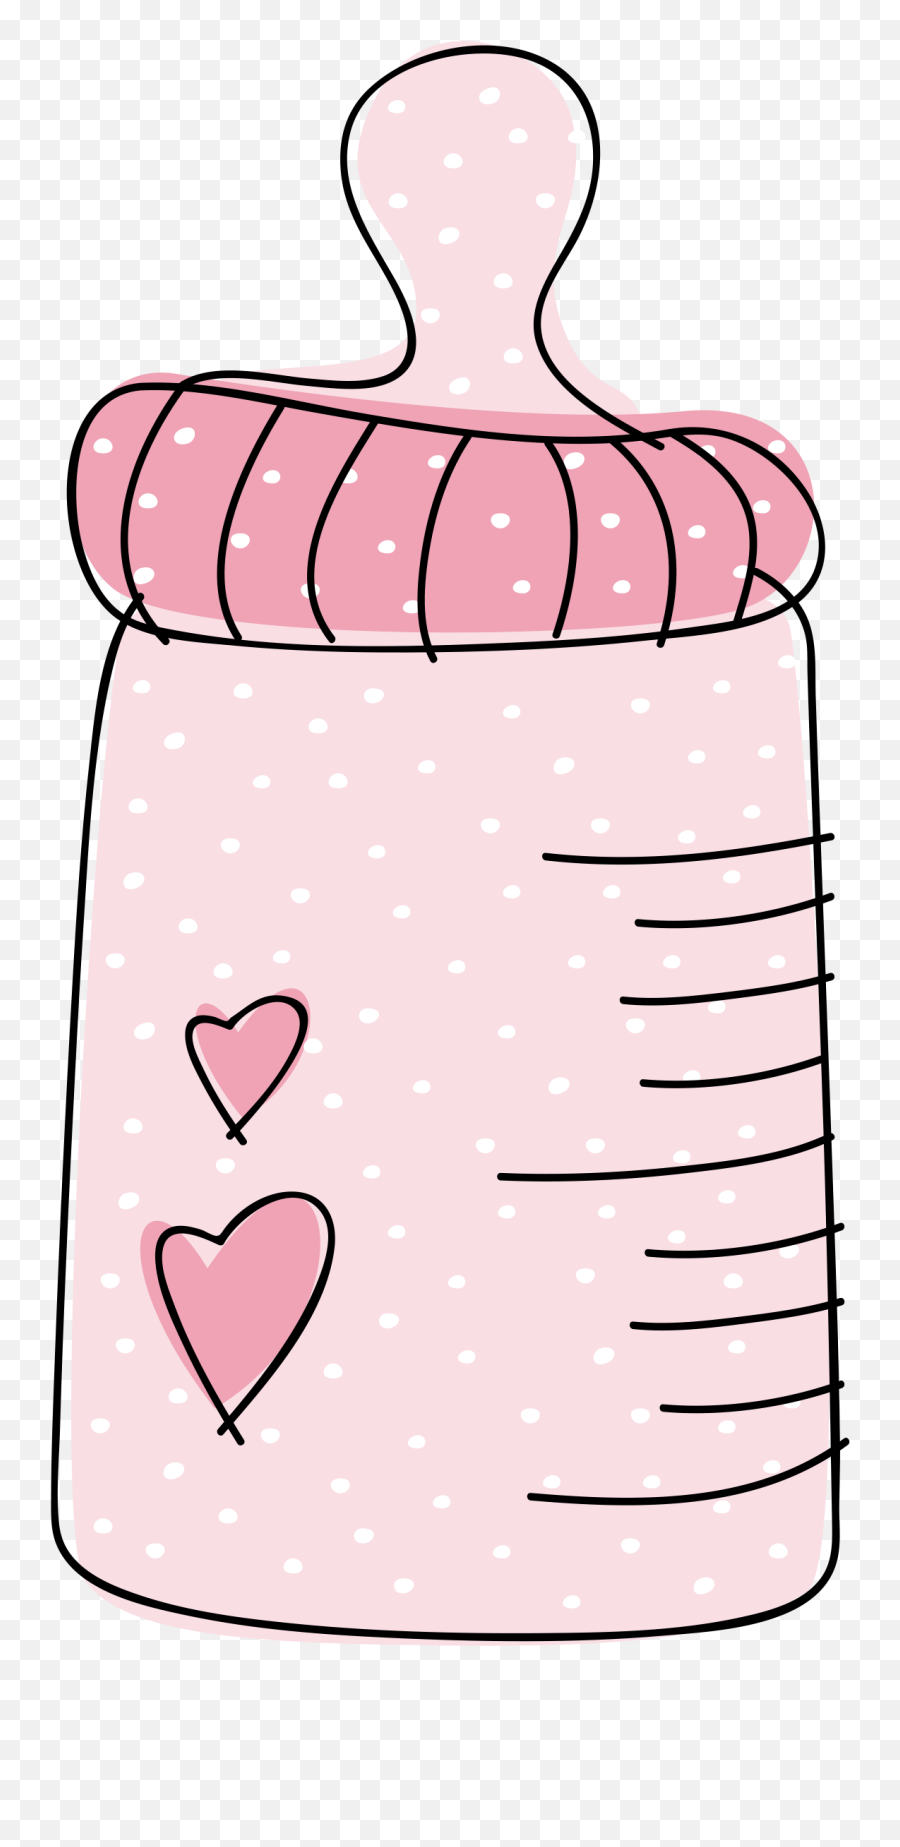 Milk Clipart Baby Bottle Pictures On Cliparts Pub 2020 - Pink Baby Bottle Clipart Emoji,Milk Bottle Emoji